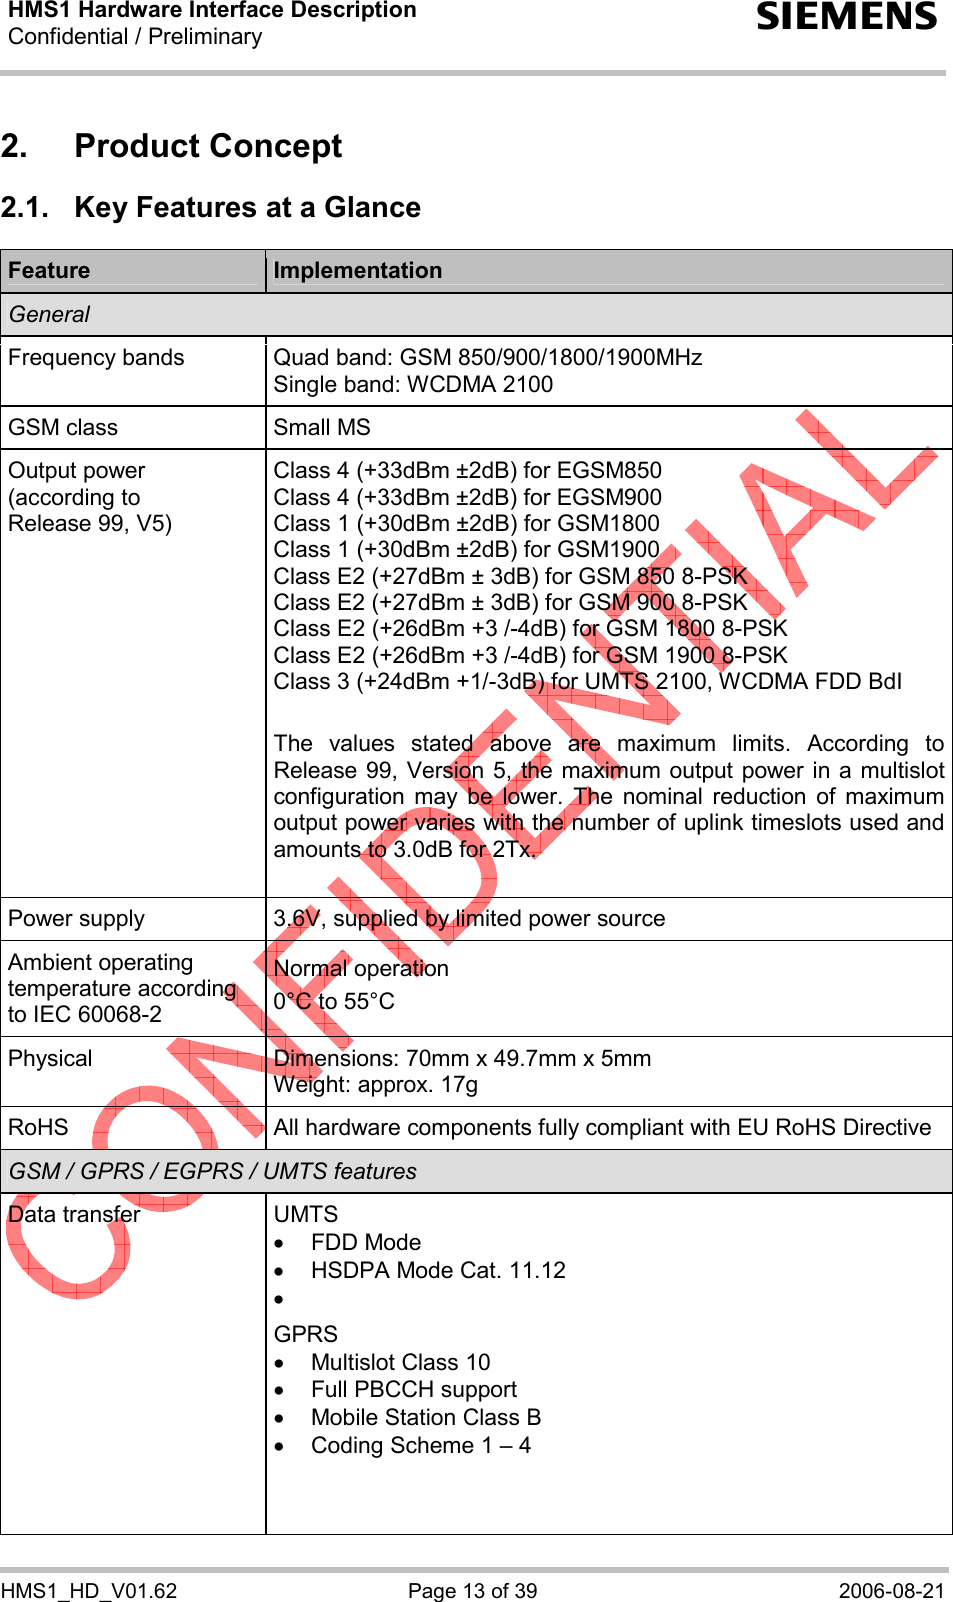 HMS1 Hardware Interface Description Confidential / Preliminary  s HMS1_HD_V01.62  Page 13 of 39  2006-08-21 2. Product Concept 2.1.  Key Features at a Glance Feature  Implementation General Frequency bands  Quad band: GSM 850/900/1800/1900MHz Single band: WCDMA 2100 GSM class  Small MS Output power (according to  Release 99, V5) Class 4 (+33dBm ±2dB) for EGSM850 Class 4 (+33dBm ±2dB) for EGSM900 Class 1 (+30dBm ±2dB) for GSM1800 Class 1 (+30dBm ±2dB) for GSM1900 Class E2 (+27dBm ± 3dB) for GSM 850 8-PSK Class E2 (+27dBm ± 3dB) for GSM 900 8-PSK Class E2 (+26dBm +3 /-4dB) for GSM 1800 8-PSK Class E2 (+26dBm +3 /-4dB) for GSM 1900 8-PSK Class 3 (+24dBm +1/-3dB) for UMTS 2100, WCDMA FDD BdI   The values stated above are maximum limits. According to Release 99, Version 5, the maximum output power in a multislot configuration may be lower. The nominal reduction of maximum output power varies with the number of uplink timeslots used and amounts to 3.0dB for 2Tx.  Power supply  3.6V, supplied by limited power source Ambient operating temperature according to IEC 60068-2 Normal operation 0°C to 55°C Physical  Dimensions: 70mm x 49.7mm x 5mm Weight: approx. 17g RoHS  All hardware components fully compliant with EU RoHS Directive GSM / GPRS / EGPRS / UMTS features Data transfer  UMTS • FDD Mode •  HSDPA Mode Cat. 11.12 •   GPRS •  Multislot Class 10 •  Full PBCCH support •  Mobile Station Class B •  Coding Scheme 1 – 4        